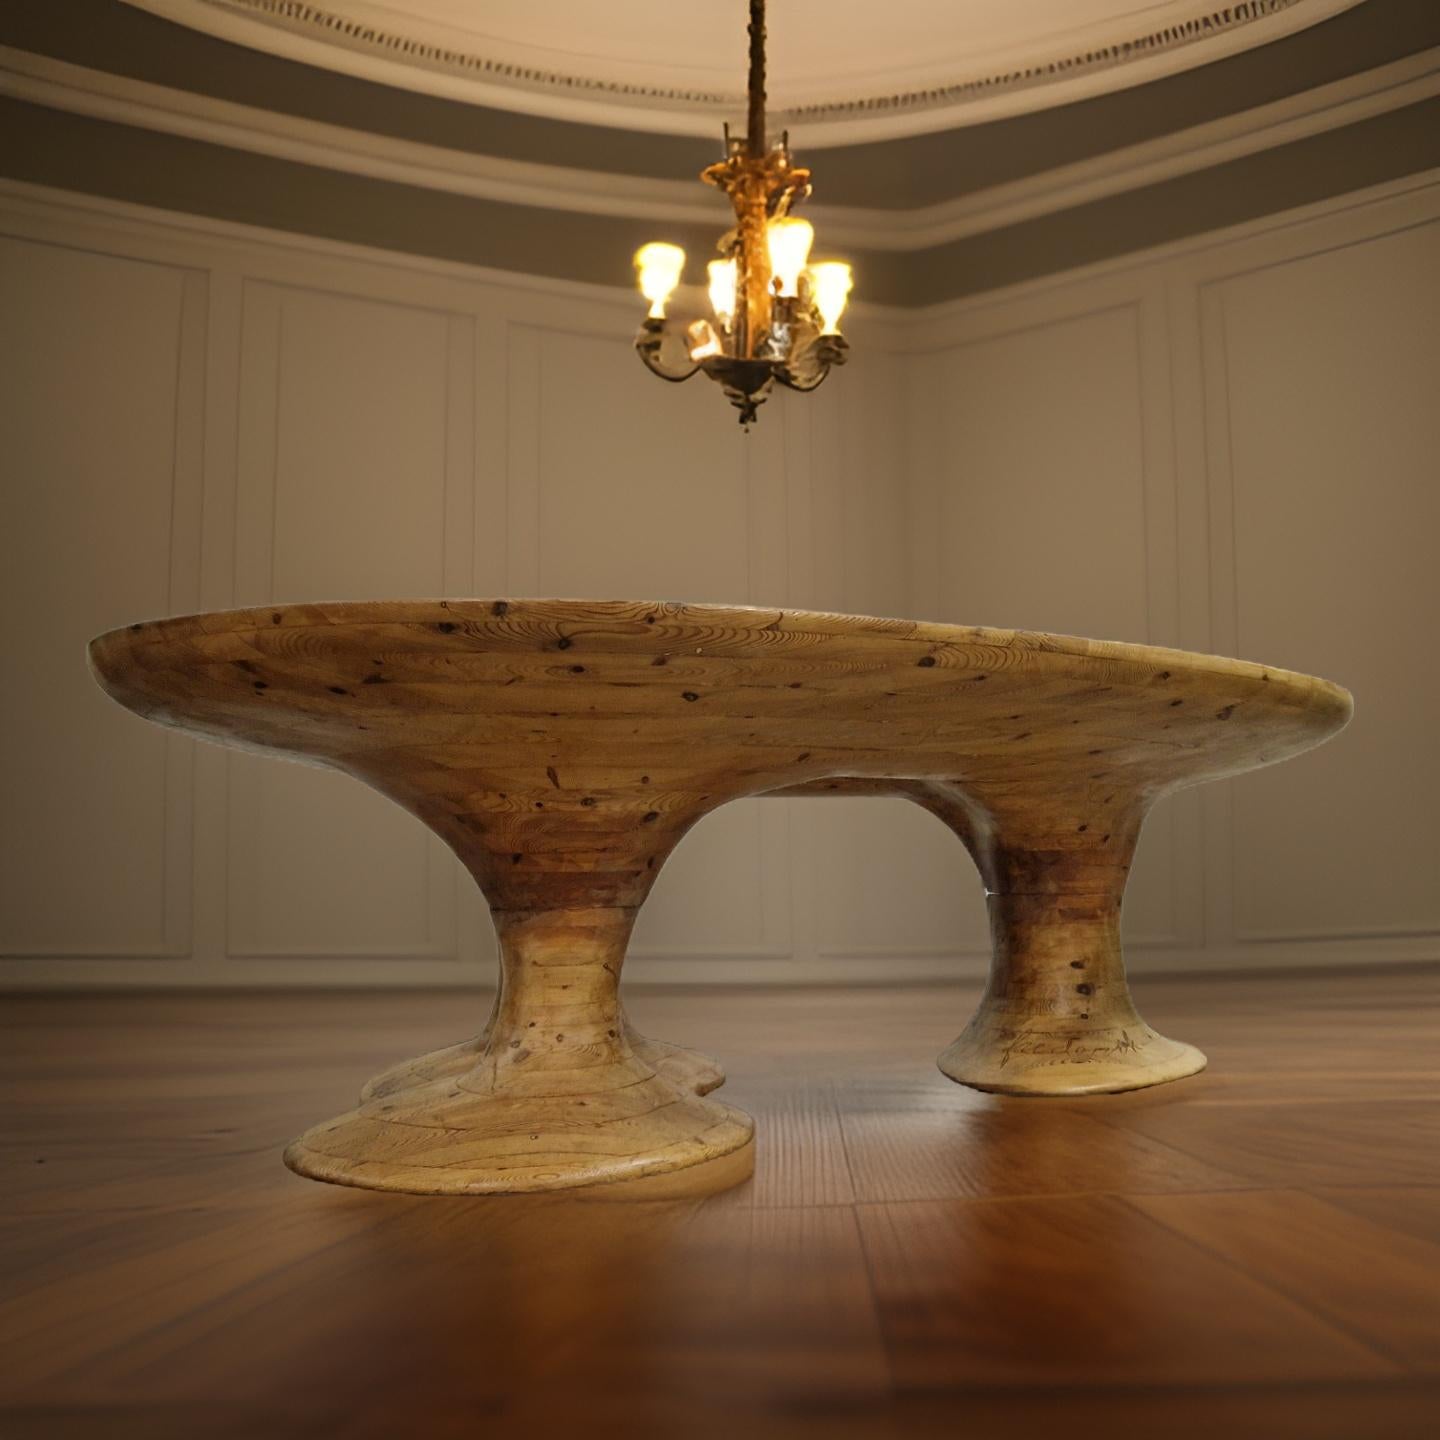 Unique hand crafted dining table. Sculpted from solid pine. The top resembles an artist palette while the three legs look like rock formations that have been sculpted by millennia of erosion. 
The table was sculpted by late visual artist Frederik